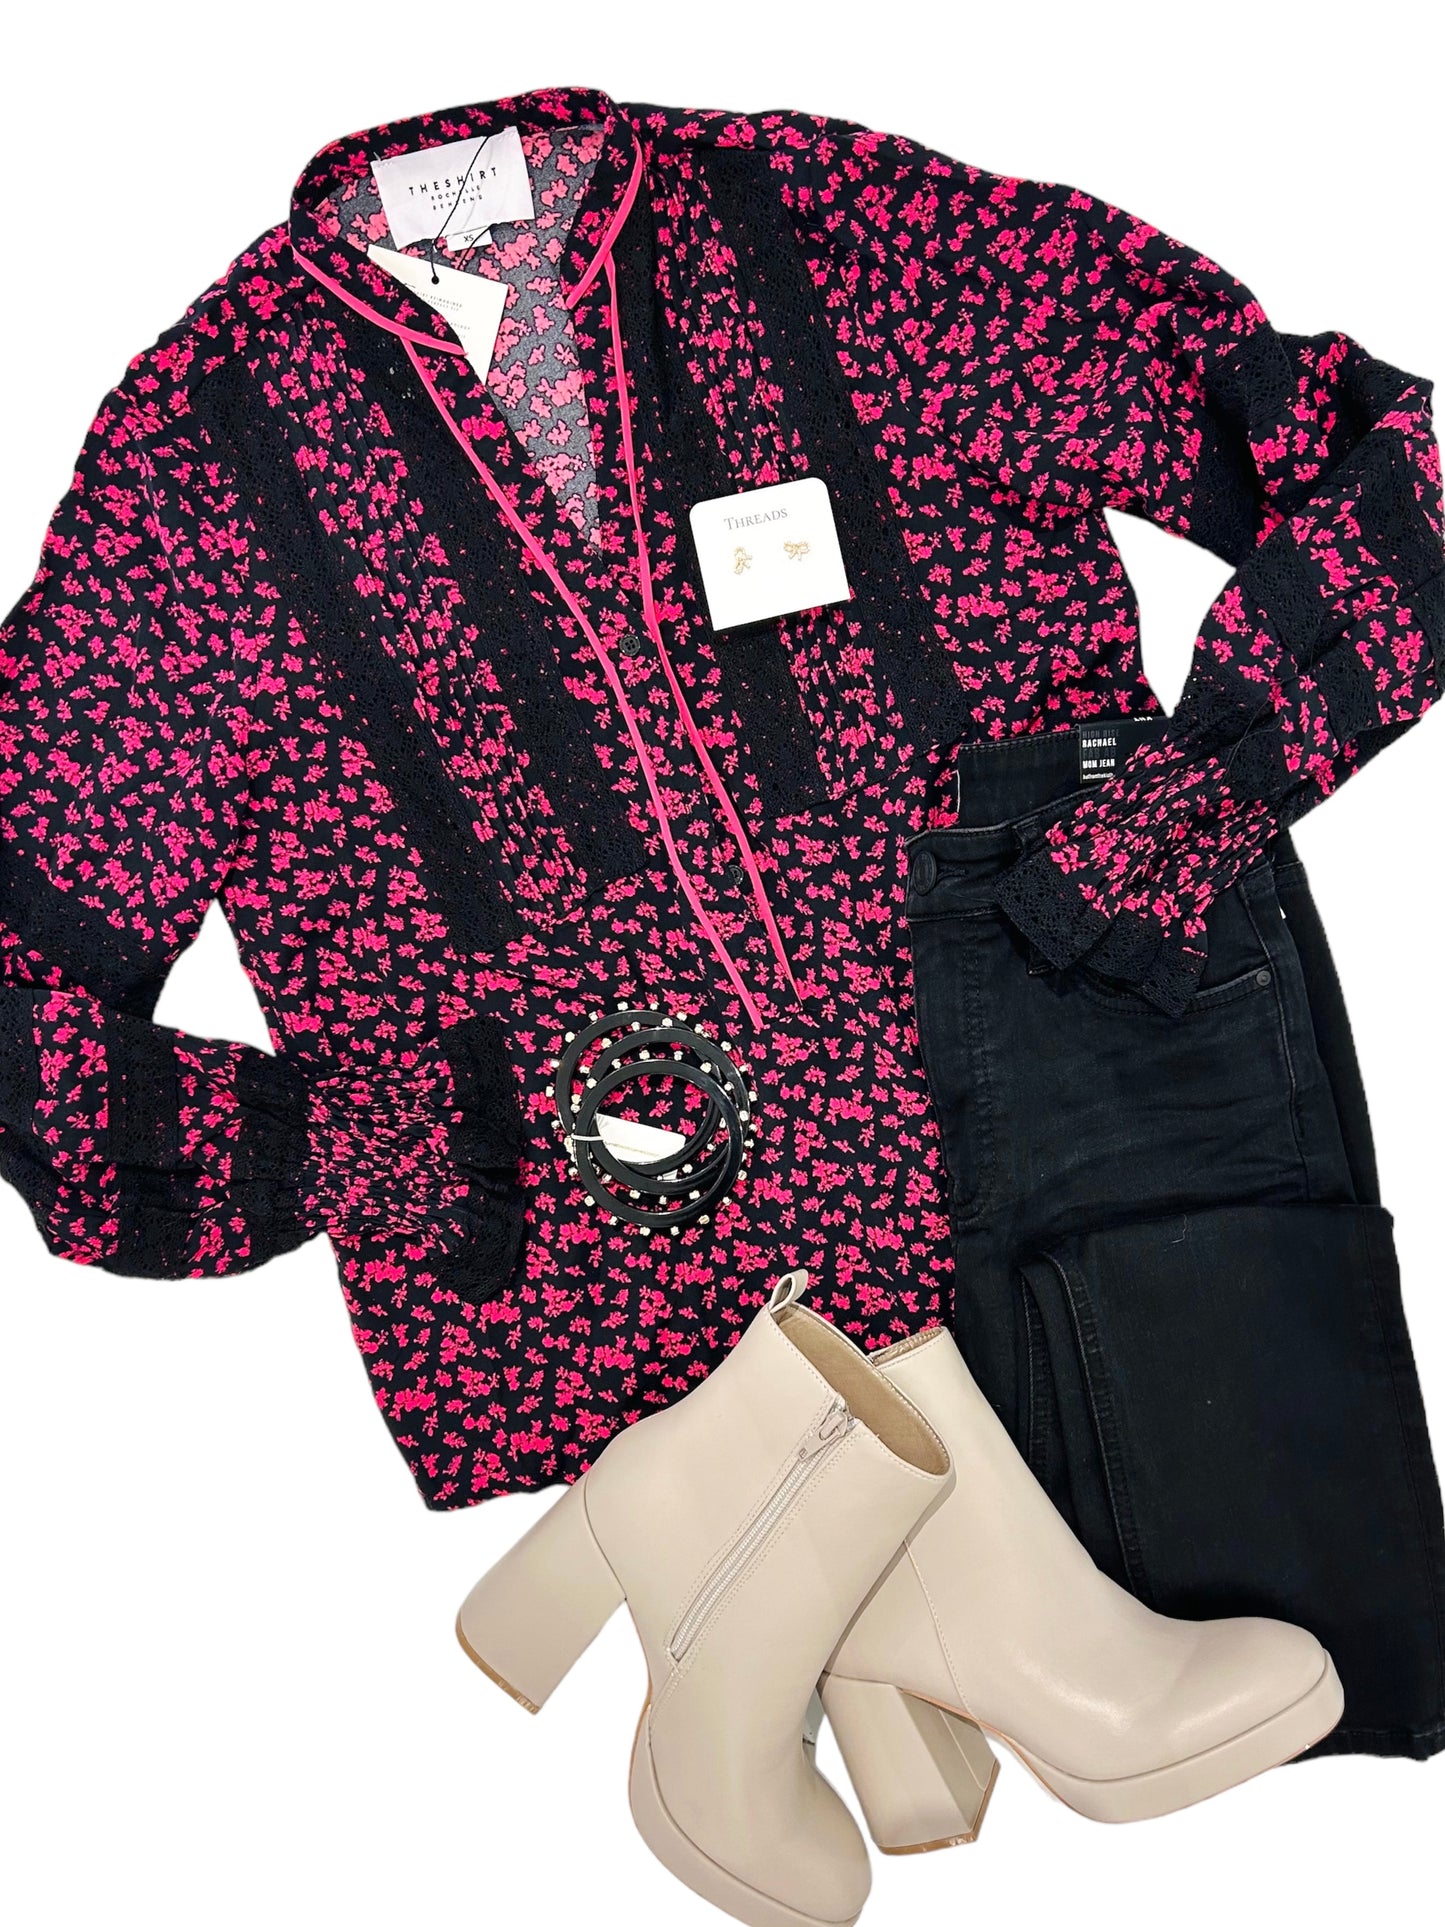 THE SHIRT Lucy Blouse in Hot Pink